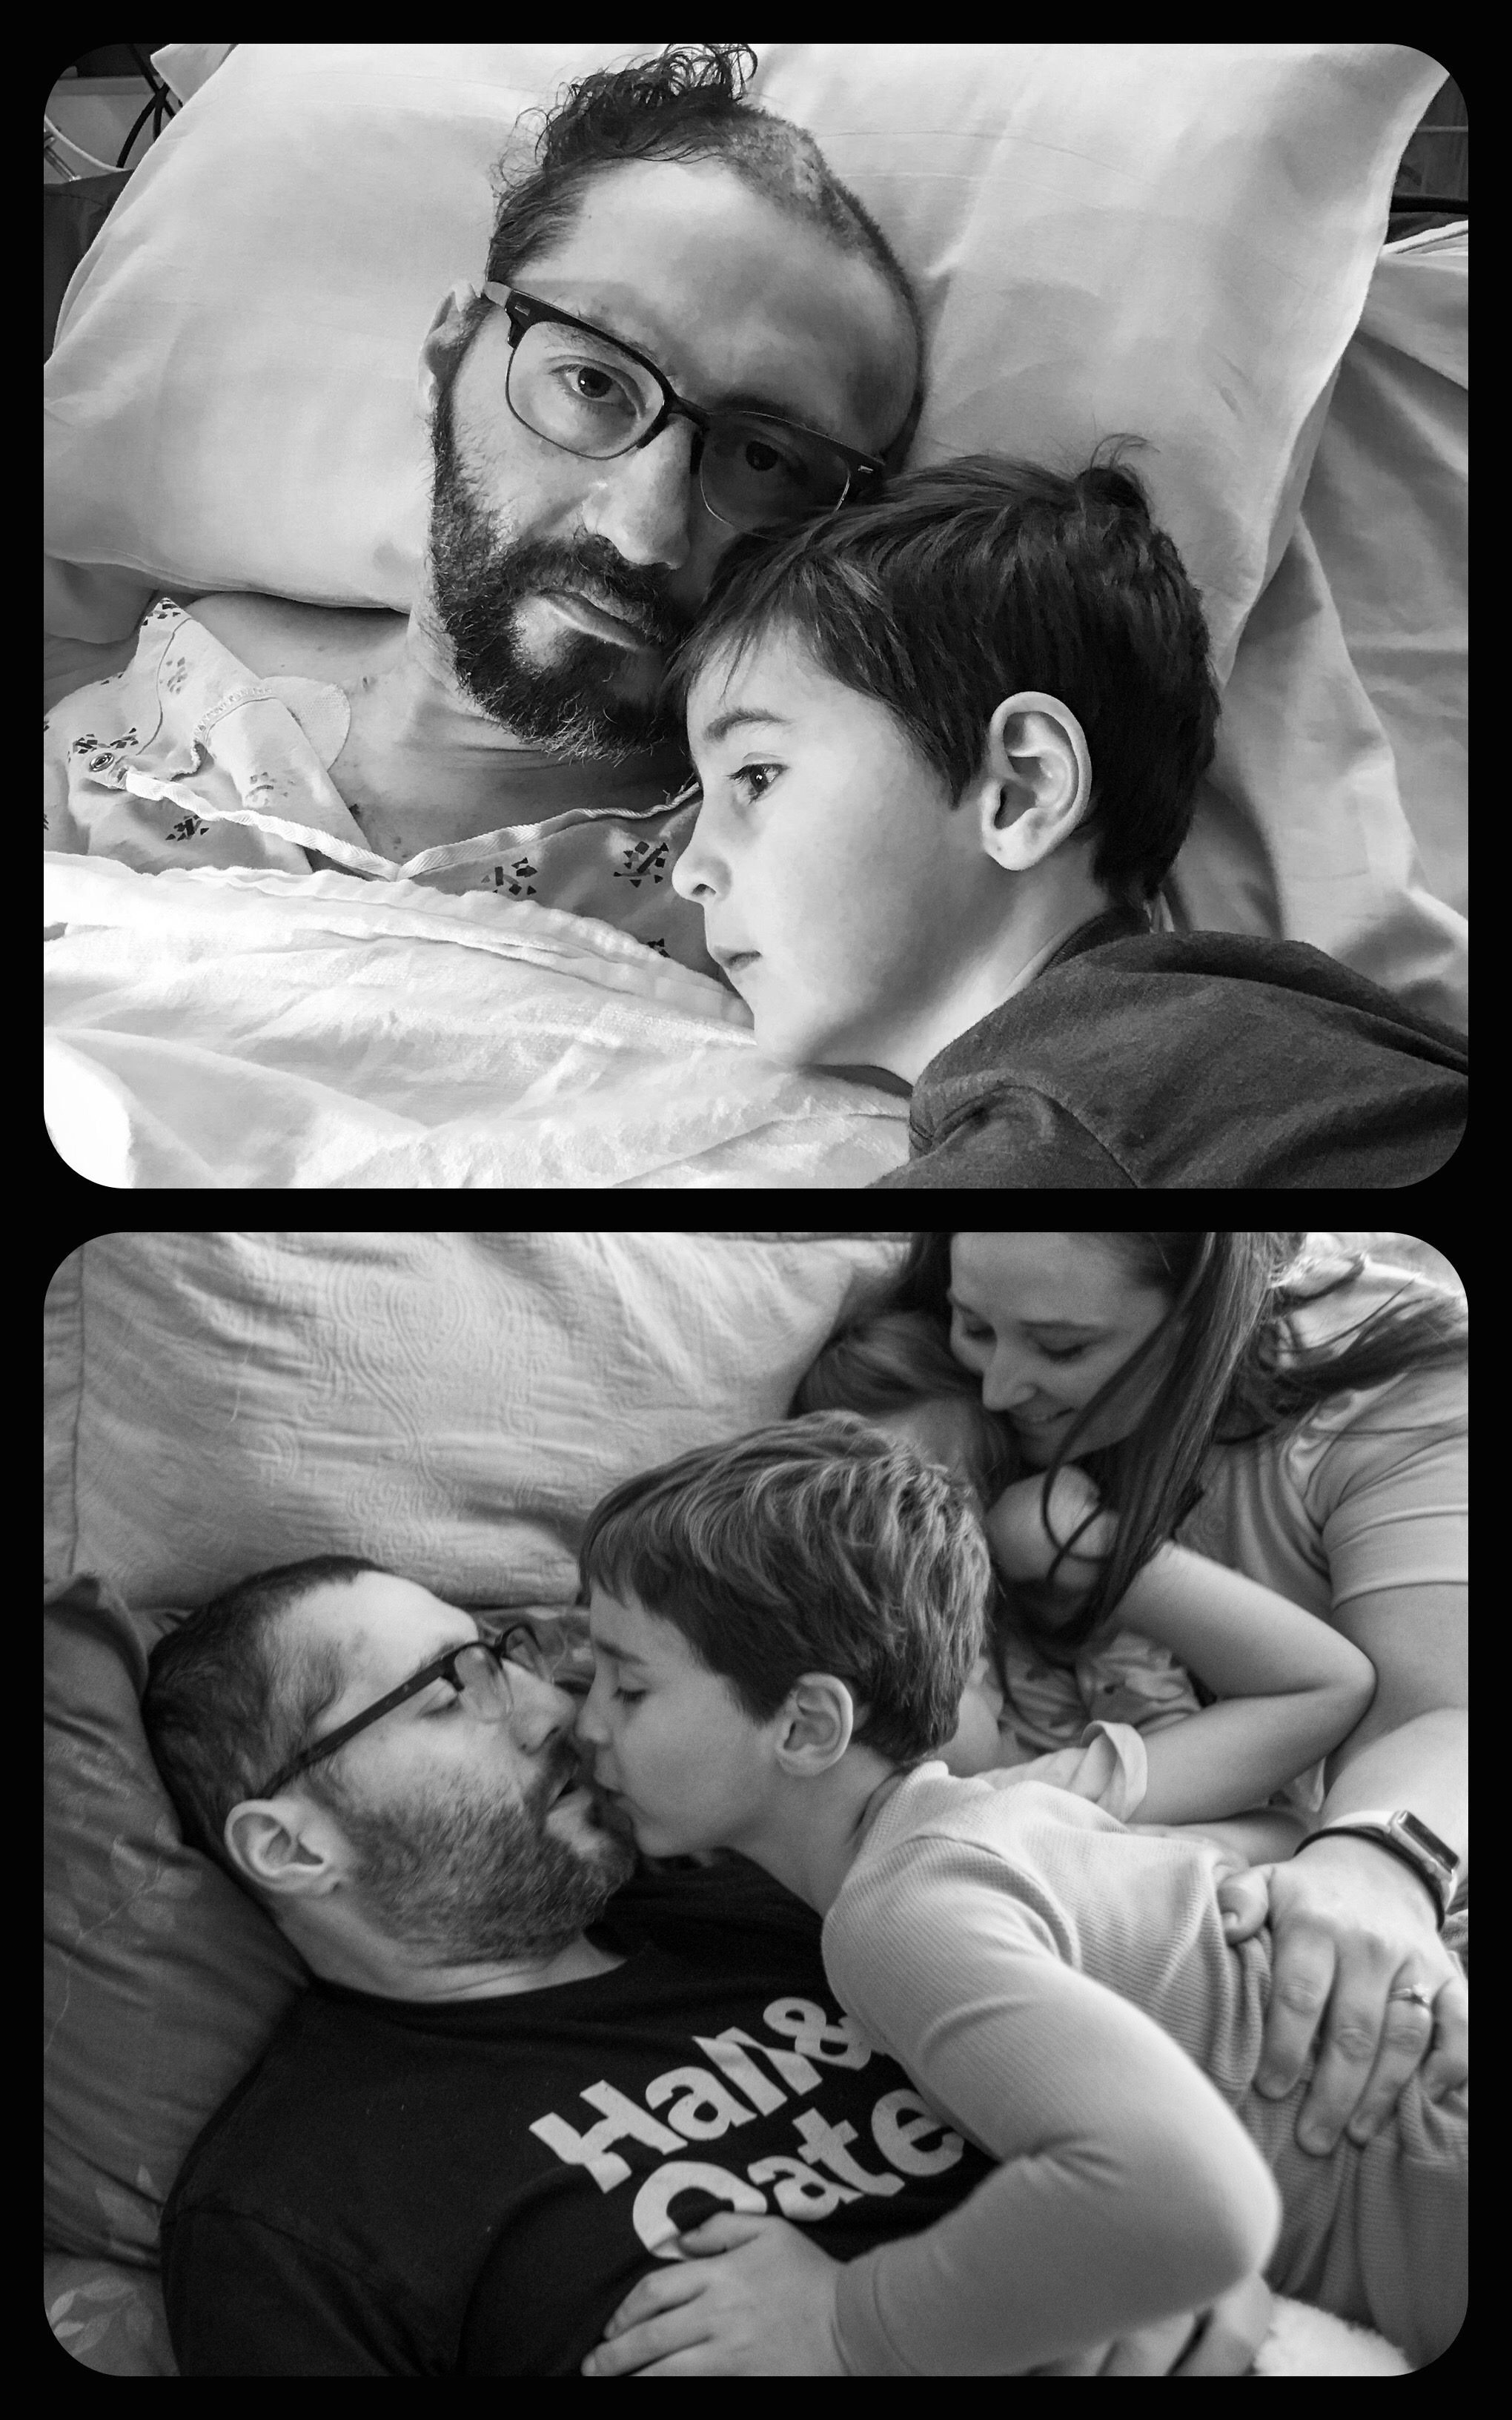  This diptych incorporates edited iPhone photos Mike’s wife Denise’s shot in the hospital paired with images I took during Mike’s stay at QLI. 